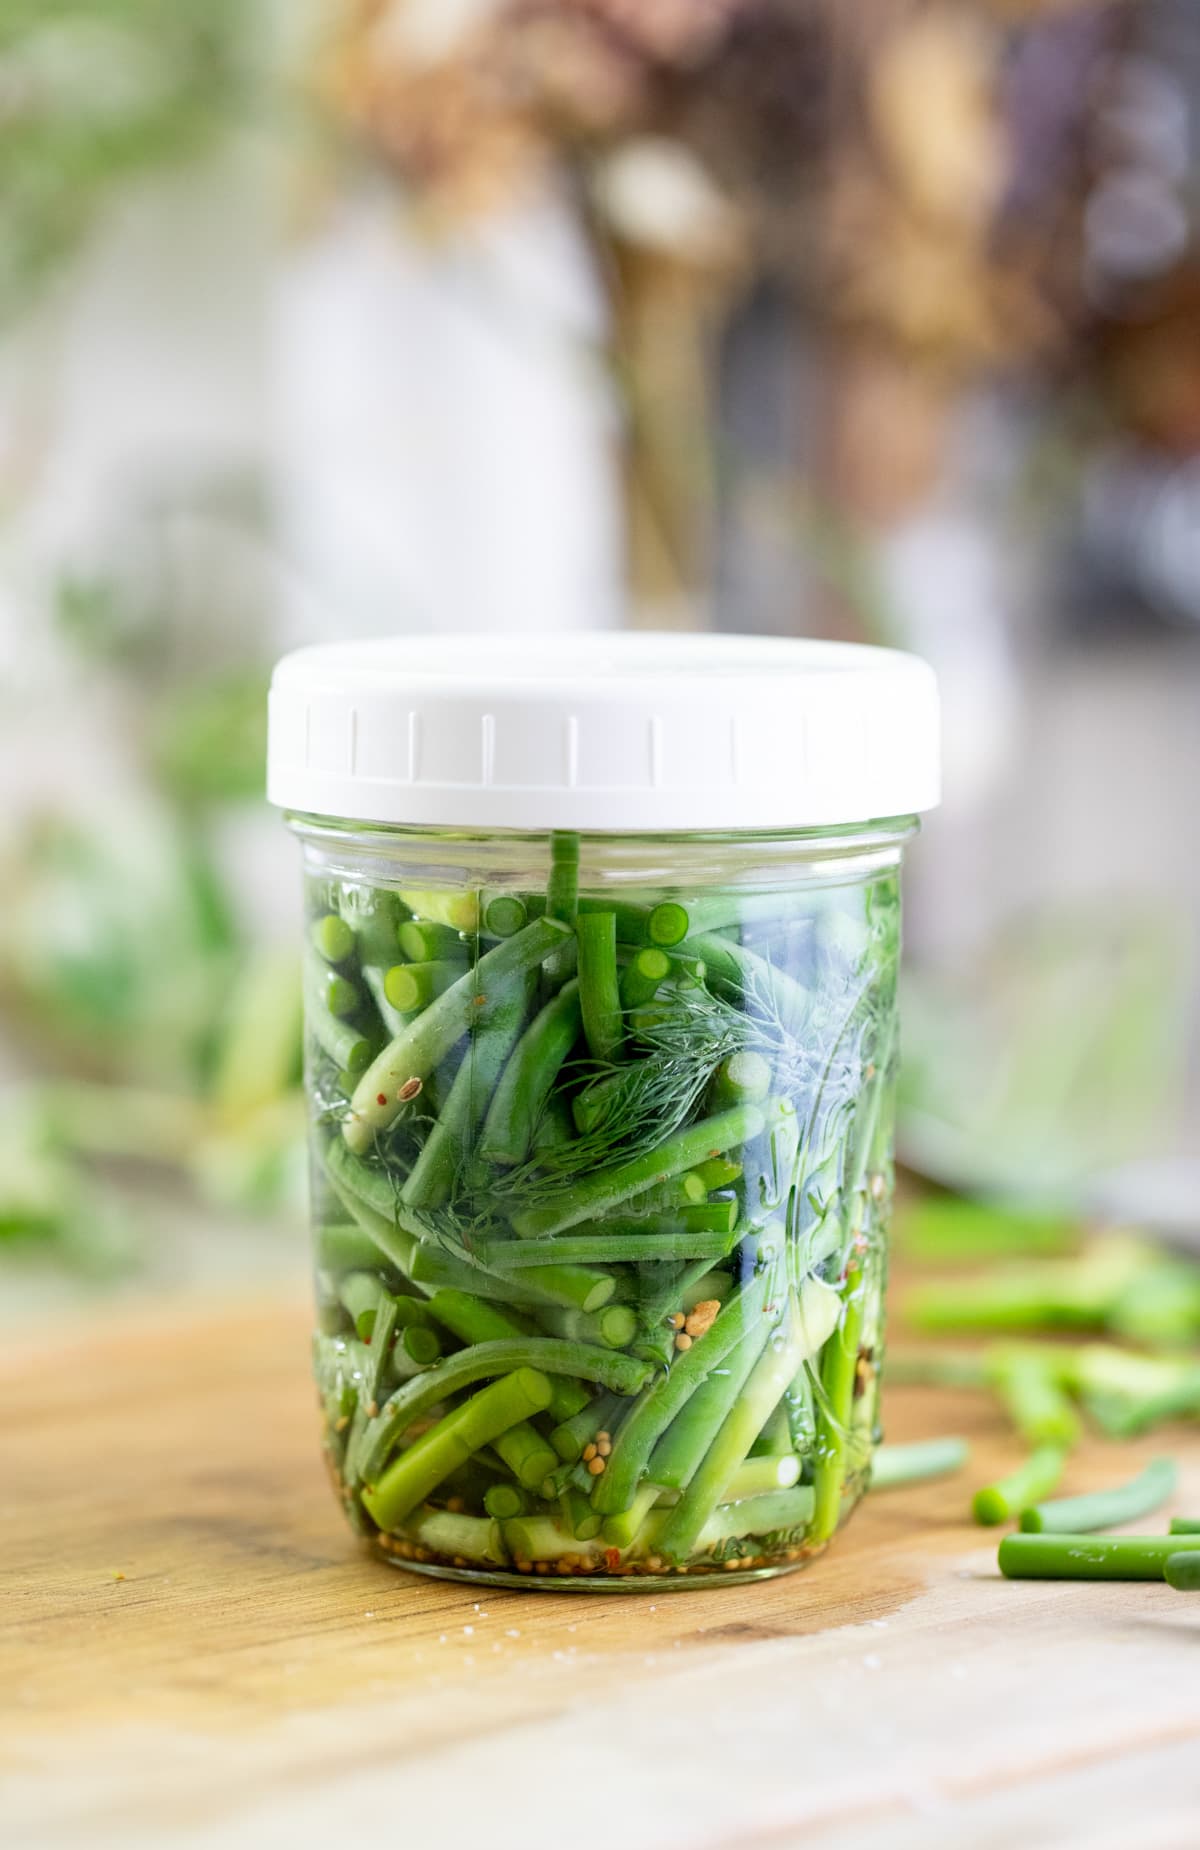 lacto fermented garlic scapes in a jar